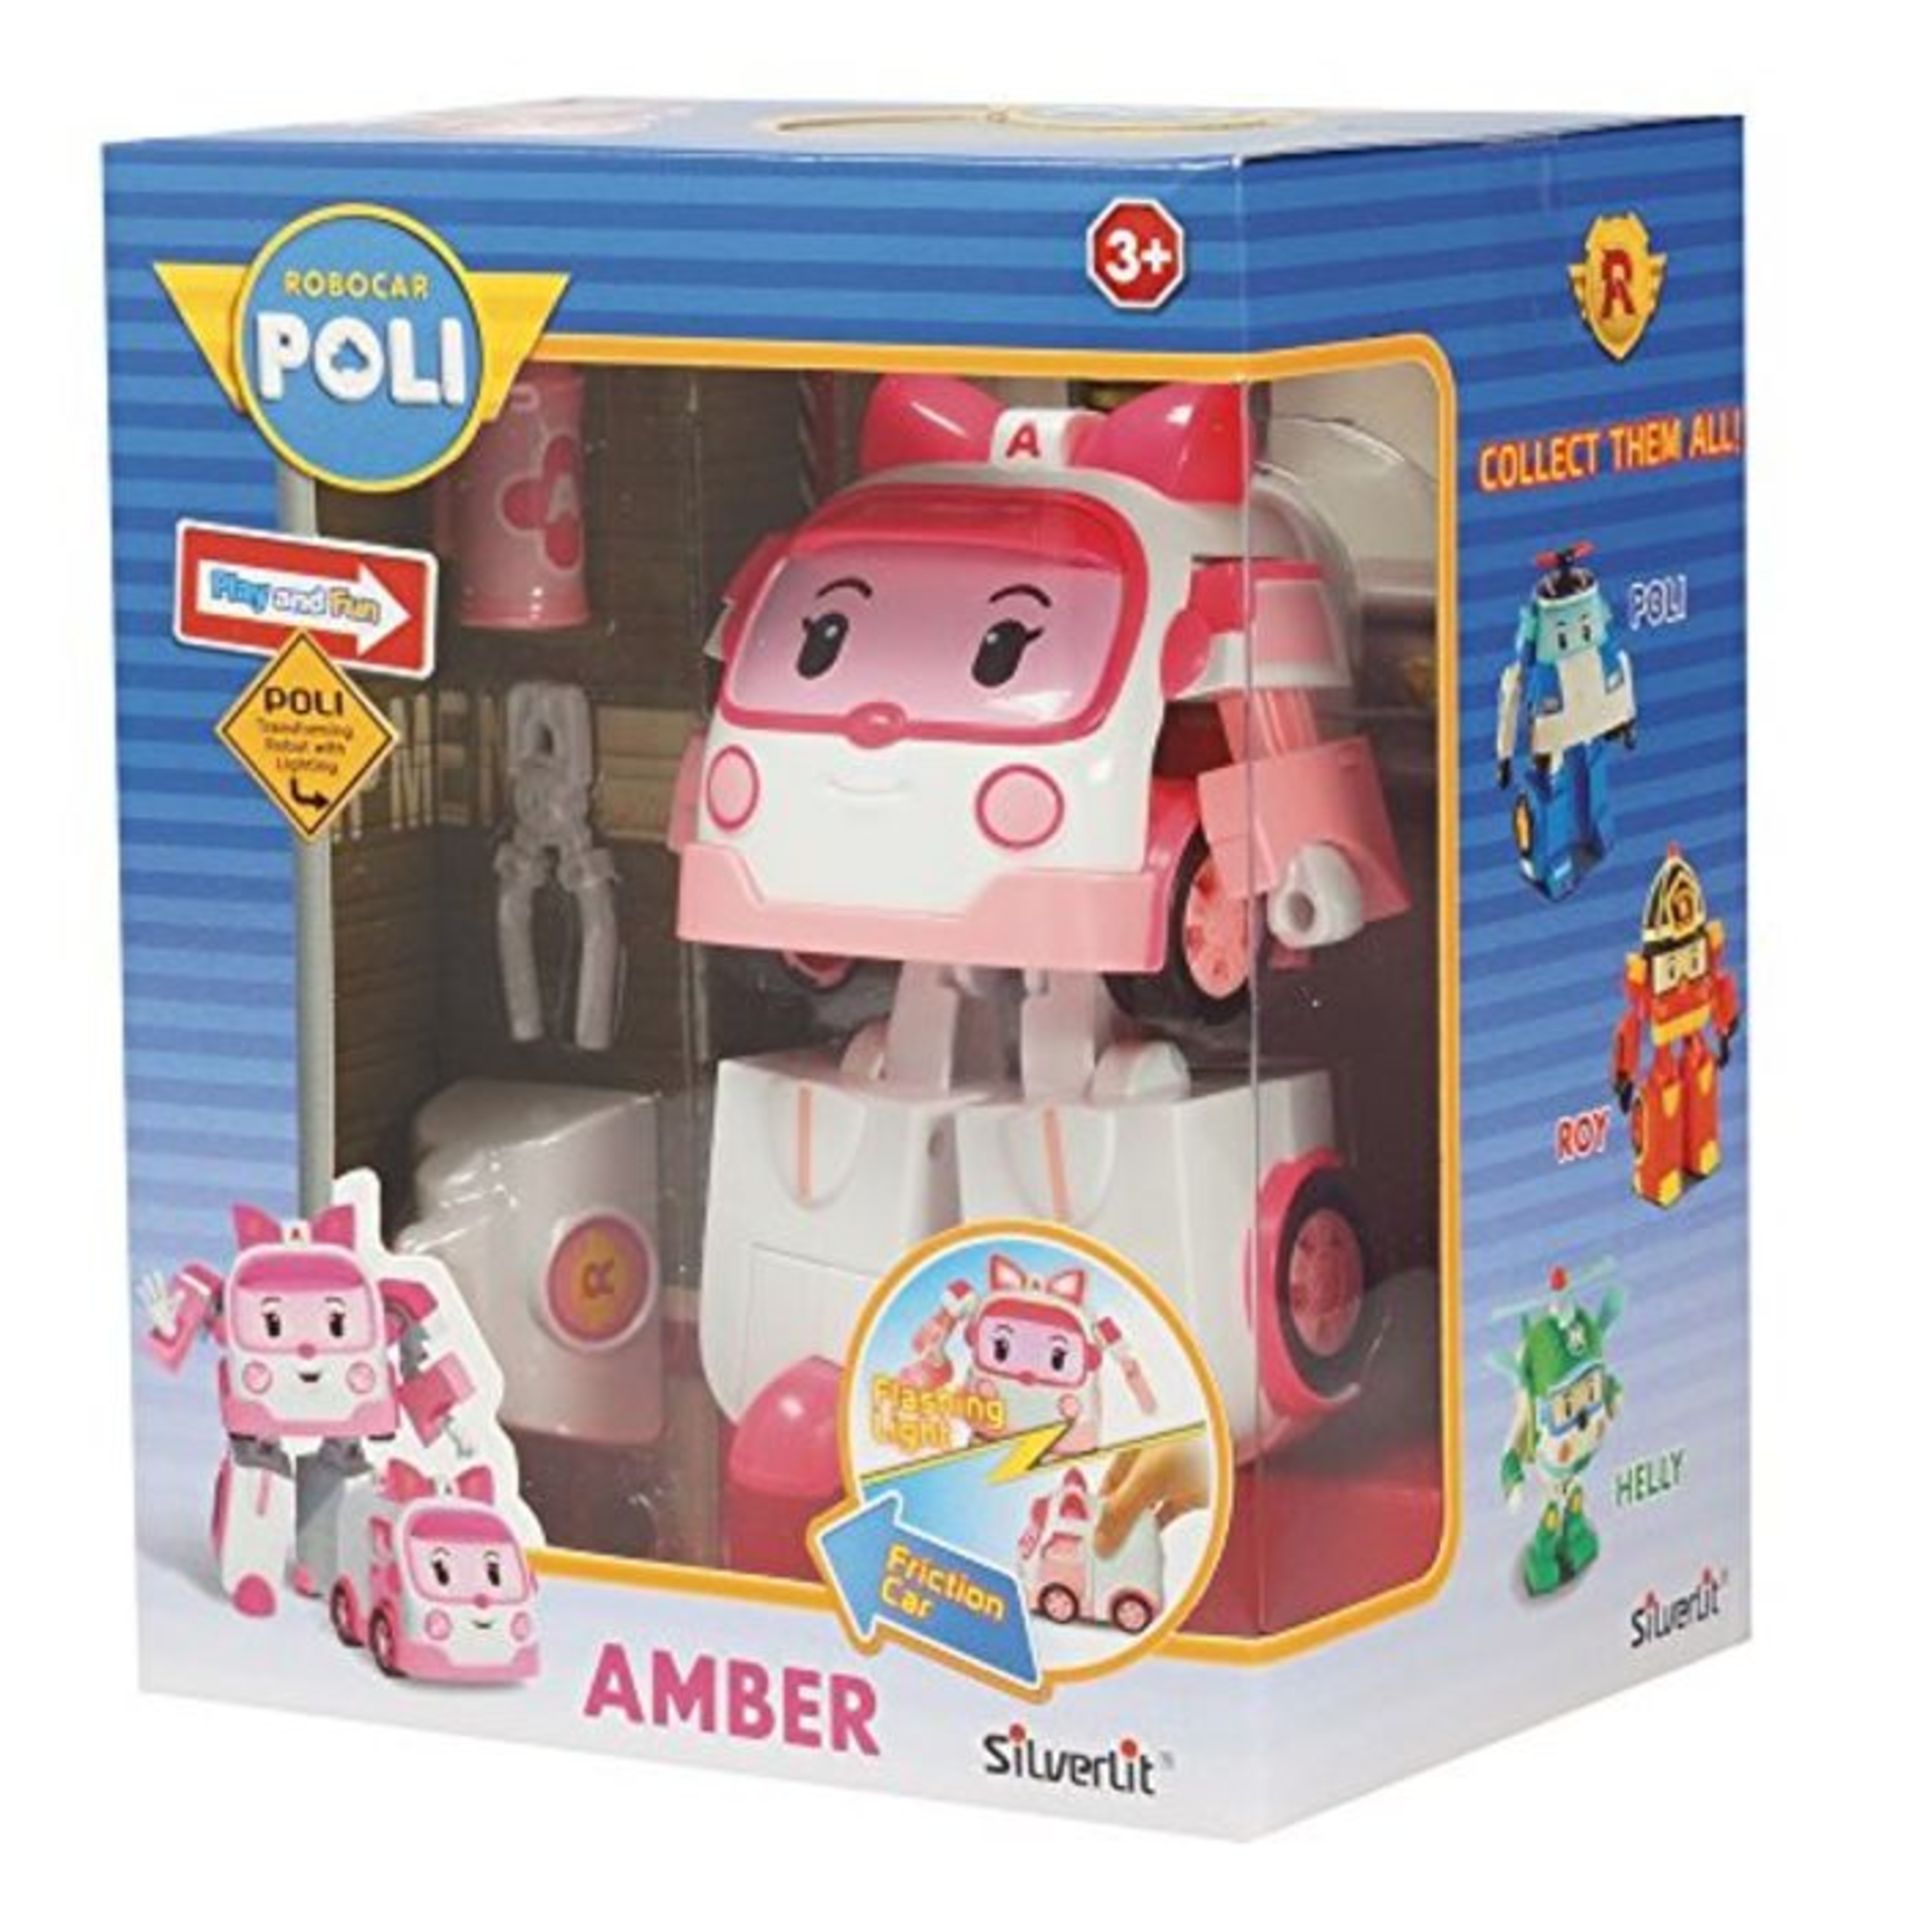 [CRACKED] Rocco Giocattoli 83095 - Robocar Poli Amber Transformable Character with Lig